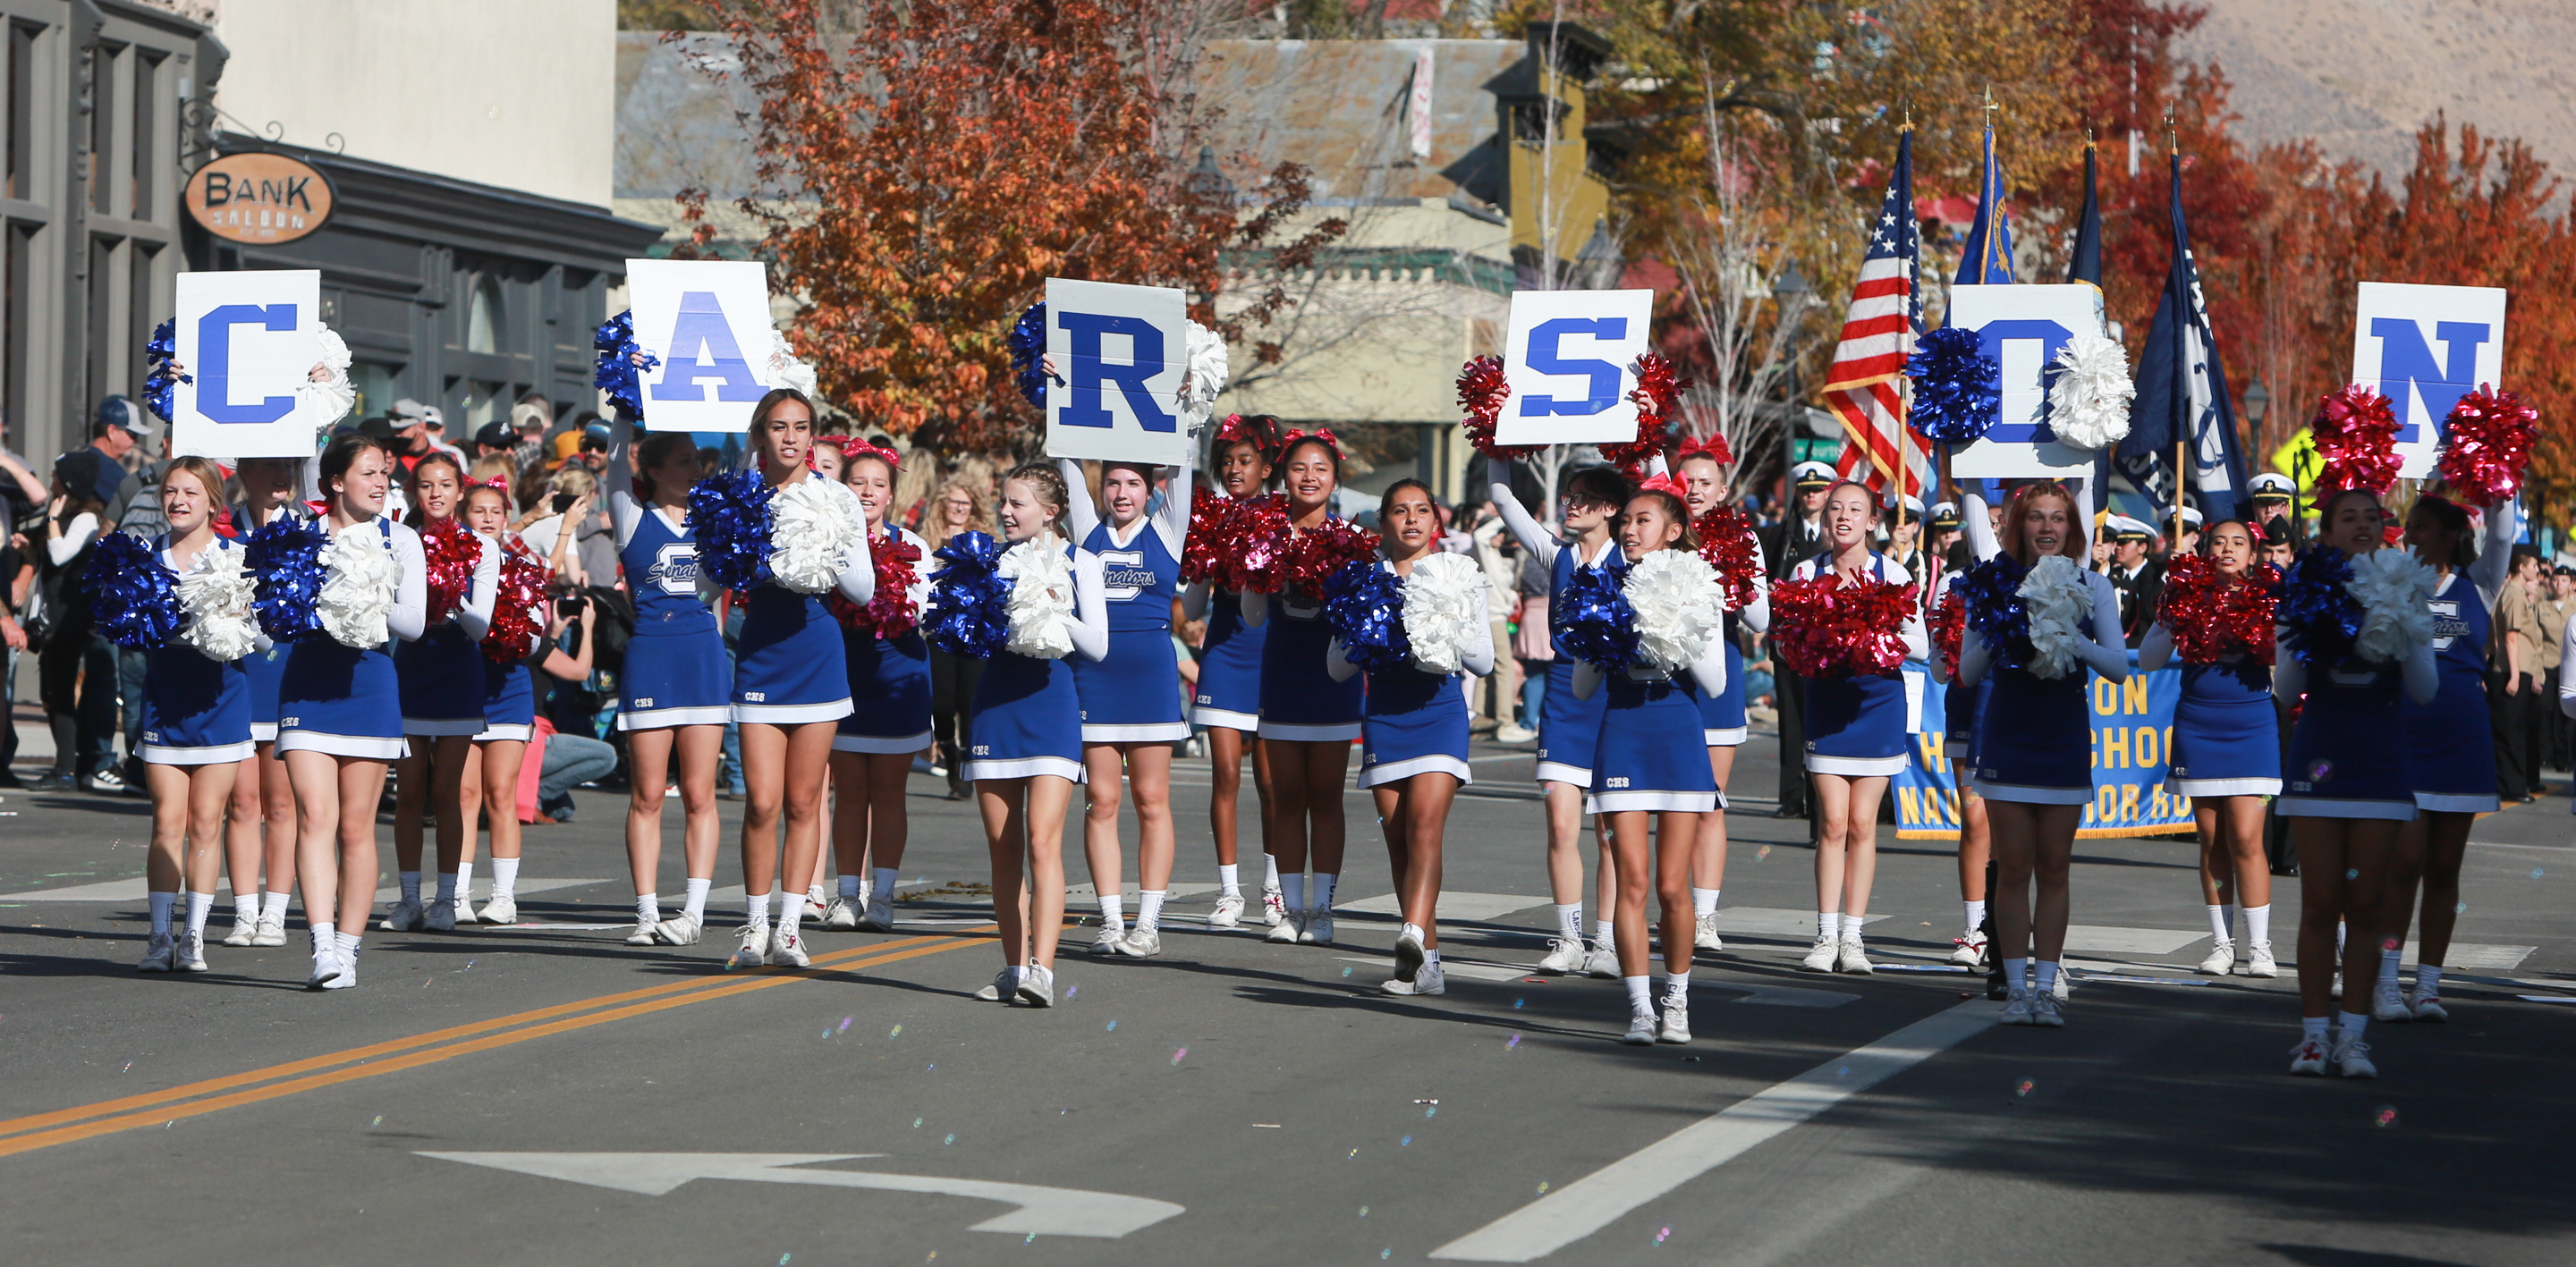 Carson City celebrates Nevada Day Serving Carson City for over 150 years